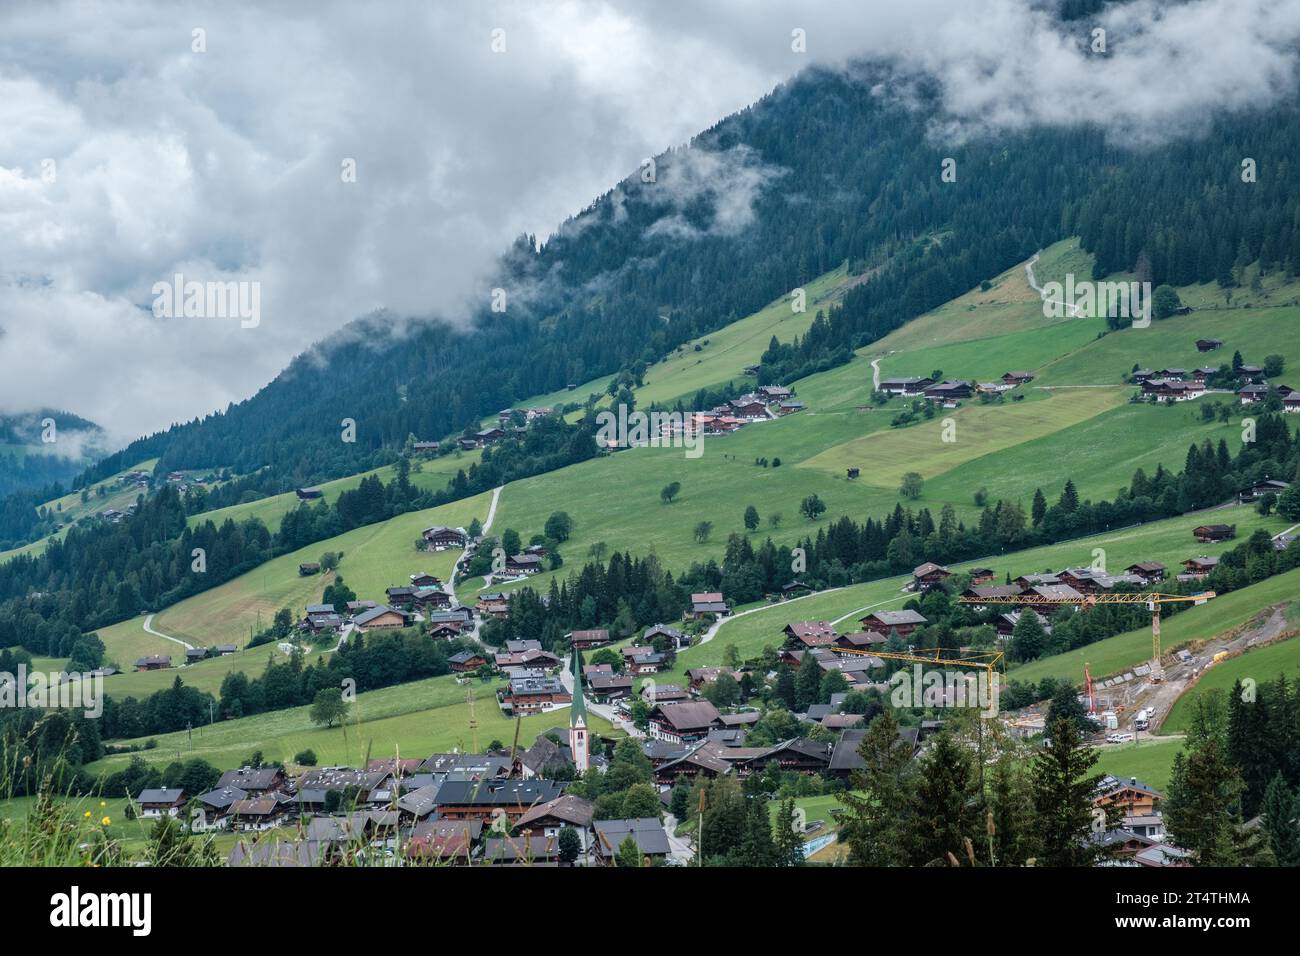 Picturesque village of Alpbach nestled among lush, rolling meadows, with misty low-hanging clouds & towering trees. Stock Photo